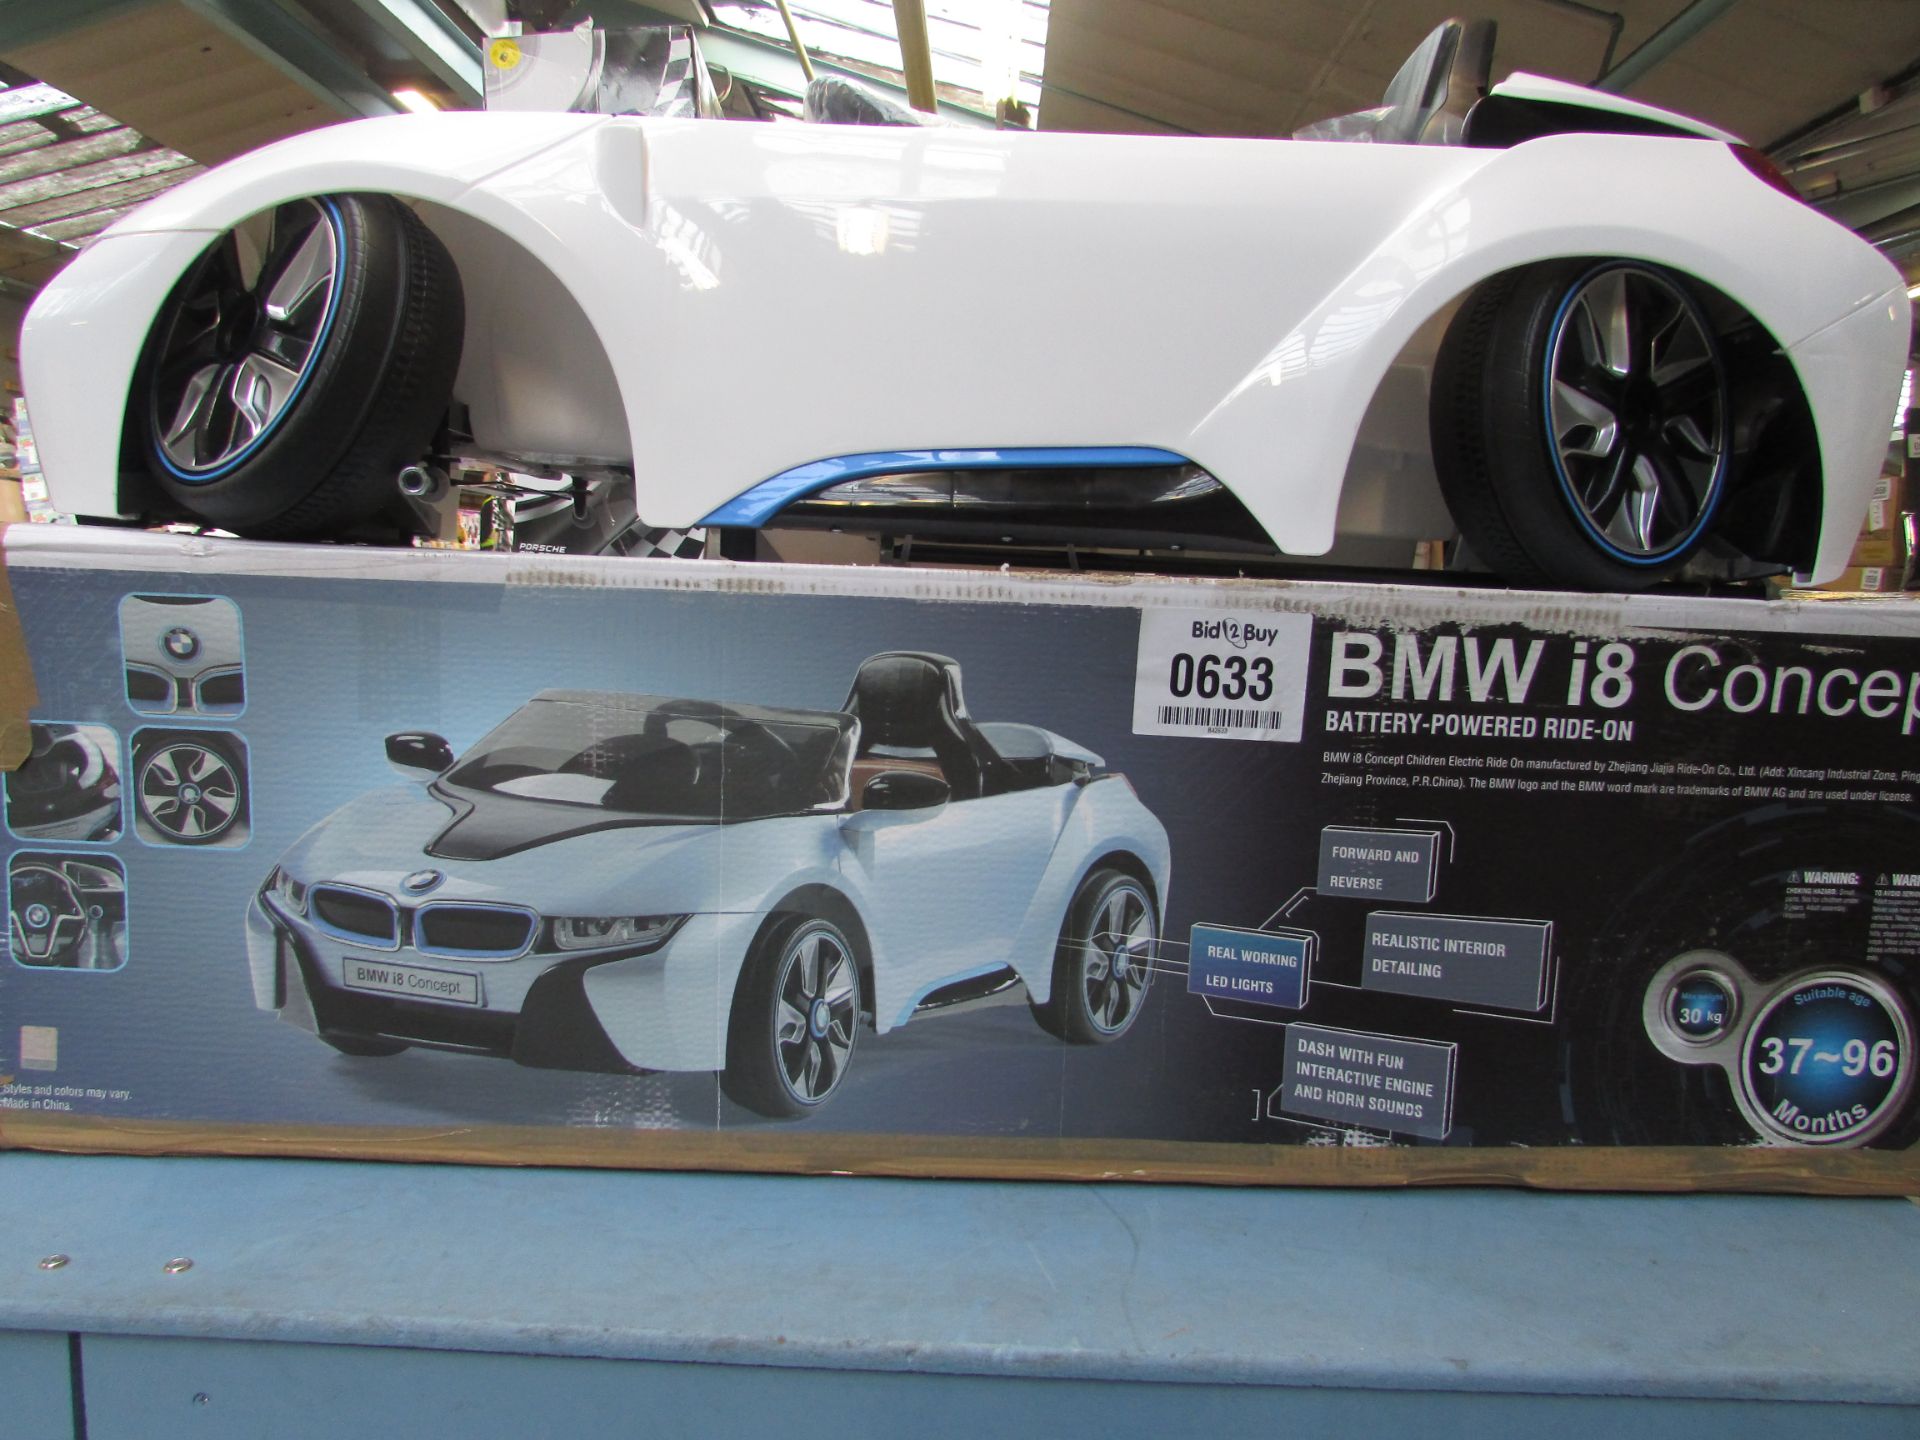 BMW I8 CONCEPT BATTERY-POWERED RIDE ON CAR LED LIGHTS